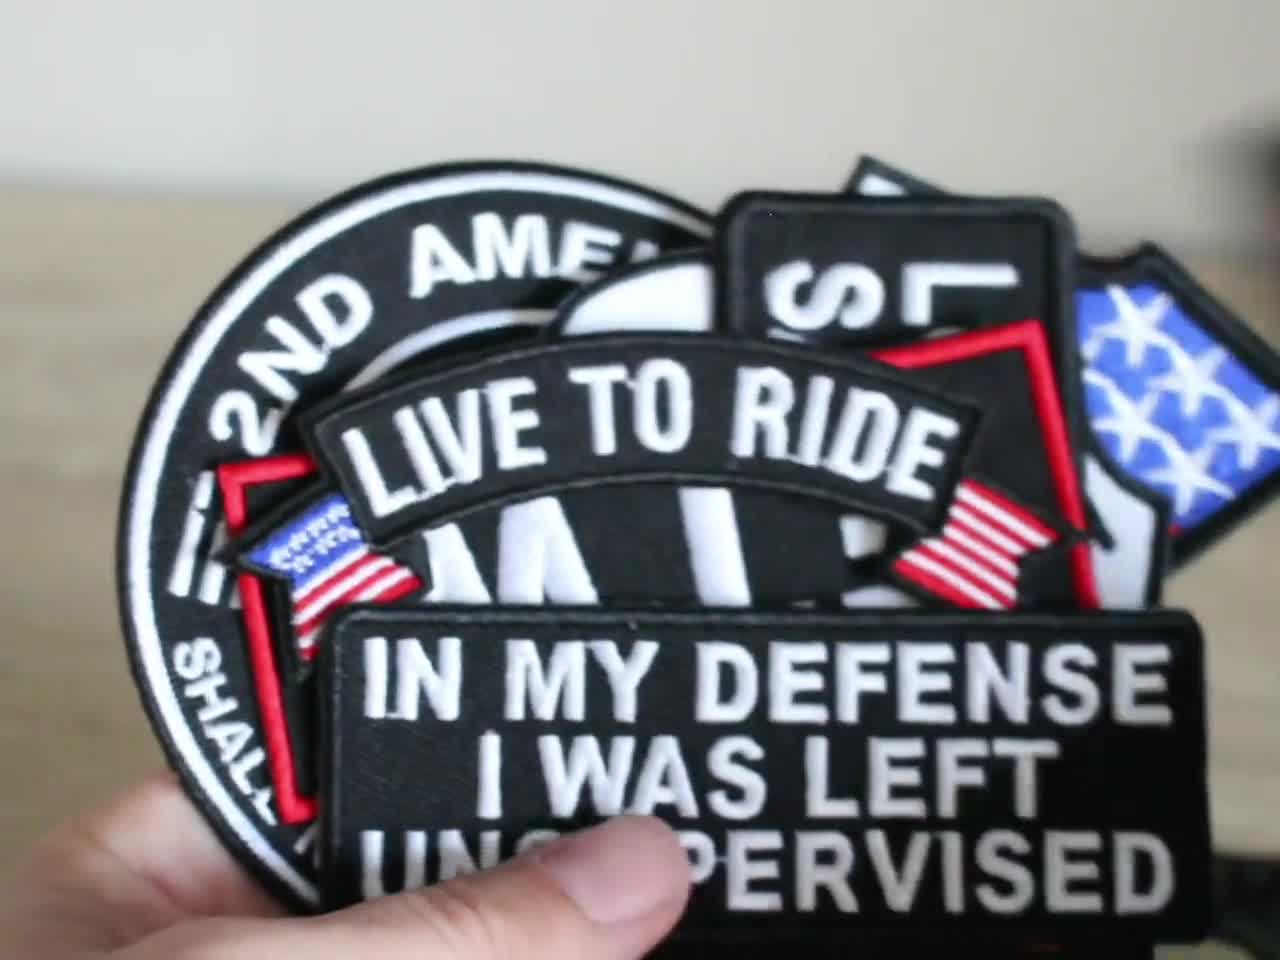 FTW Live to Ride #1 Flag Skull Pow Mia Harley Club Motorcycle Patches 15pc Set